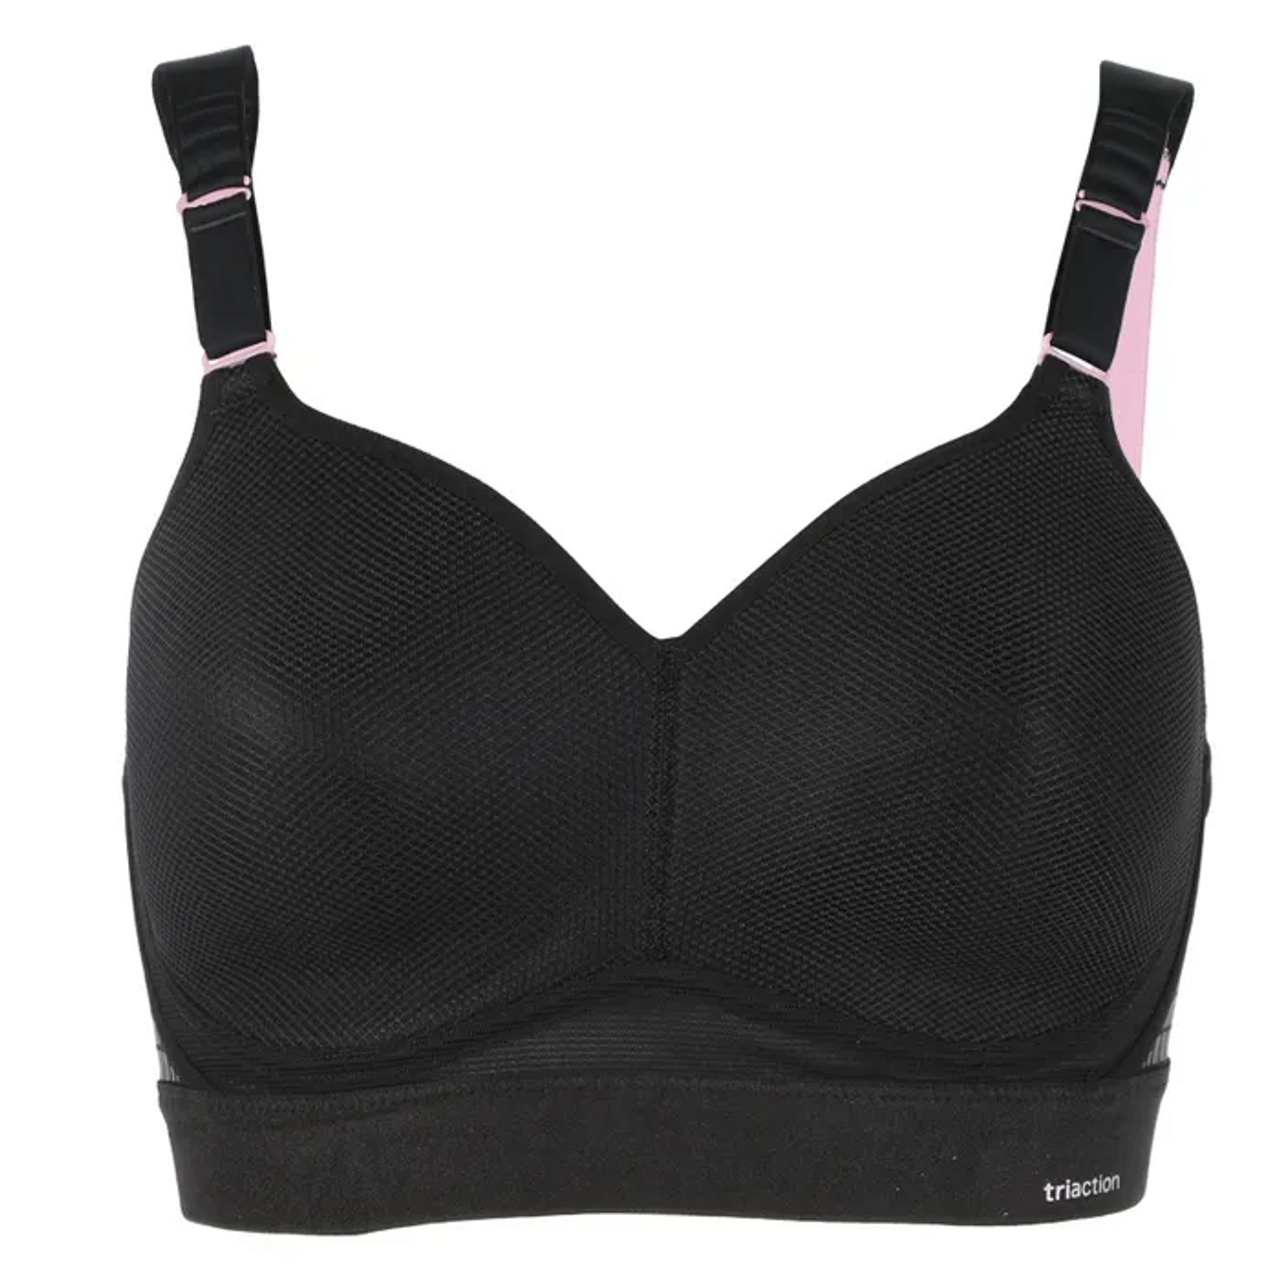 triaction by Triumph WELLNESS NON-WIRED - High support sports bra